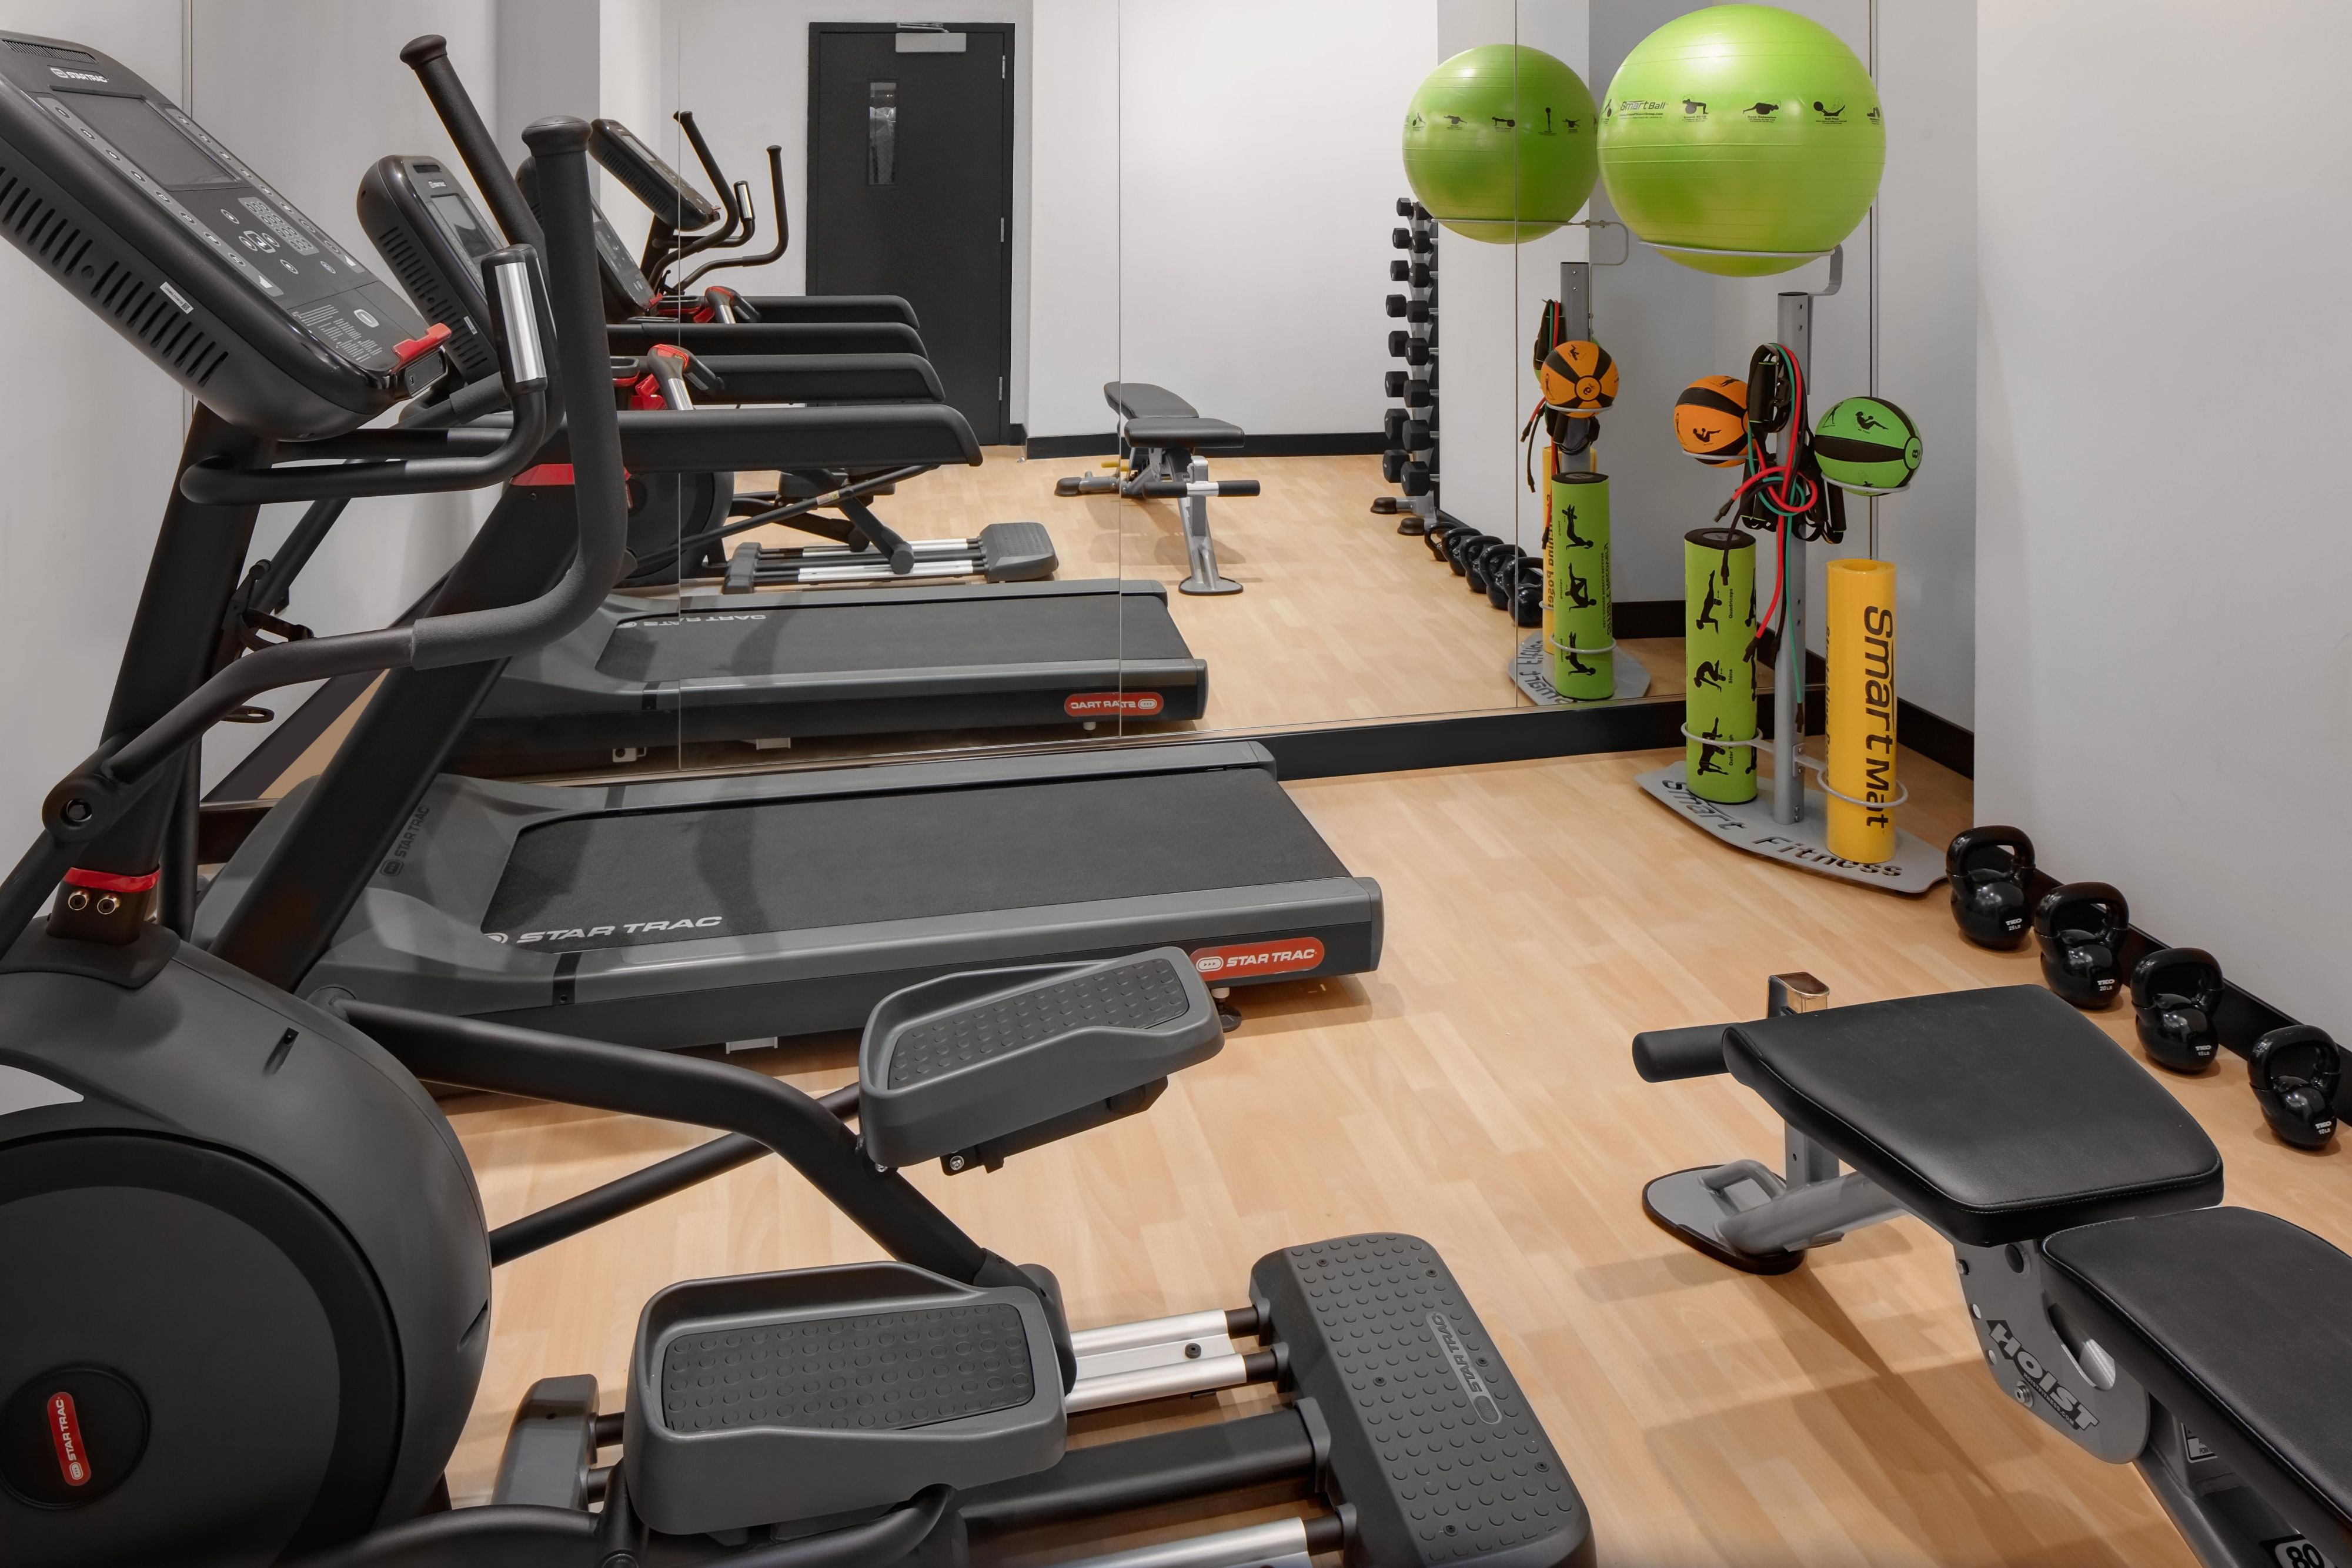 Travel is about work-life balance, and we make sure you get that in the heart of NYC. Organize your meetings or print a presentation in our 24/7 Business Center. Get energized with a workout in our Fitness Center featuring cardio & strength training equipment, including treadmills & free weights. With free WiFi, you stay connected to home & office.